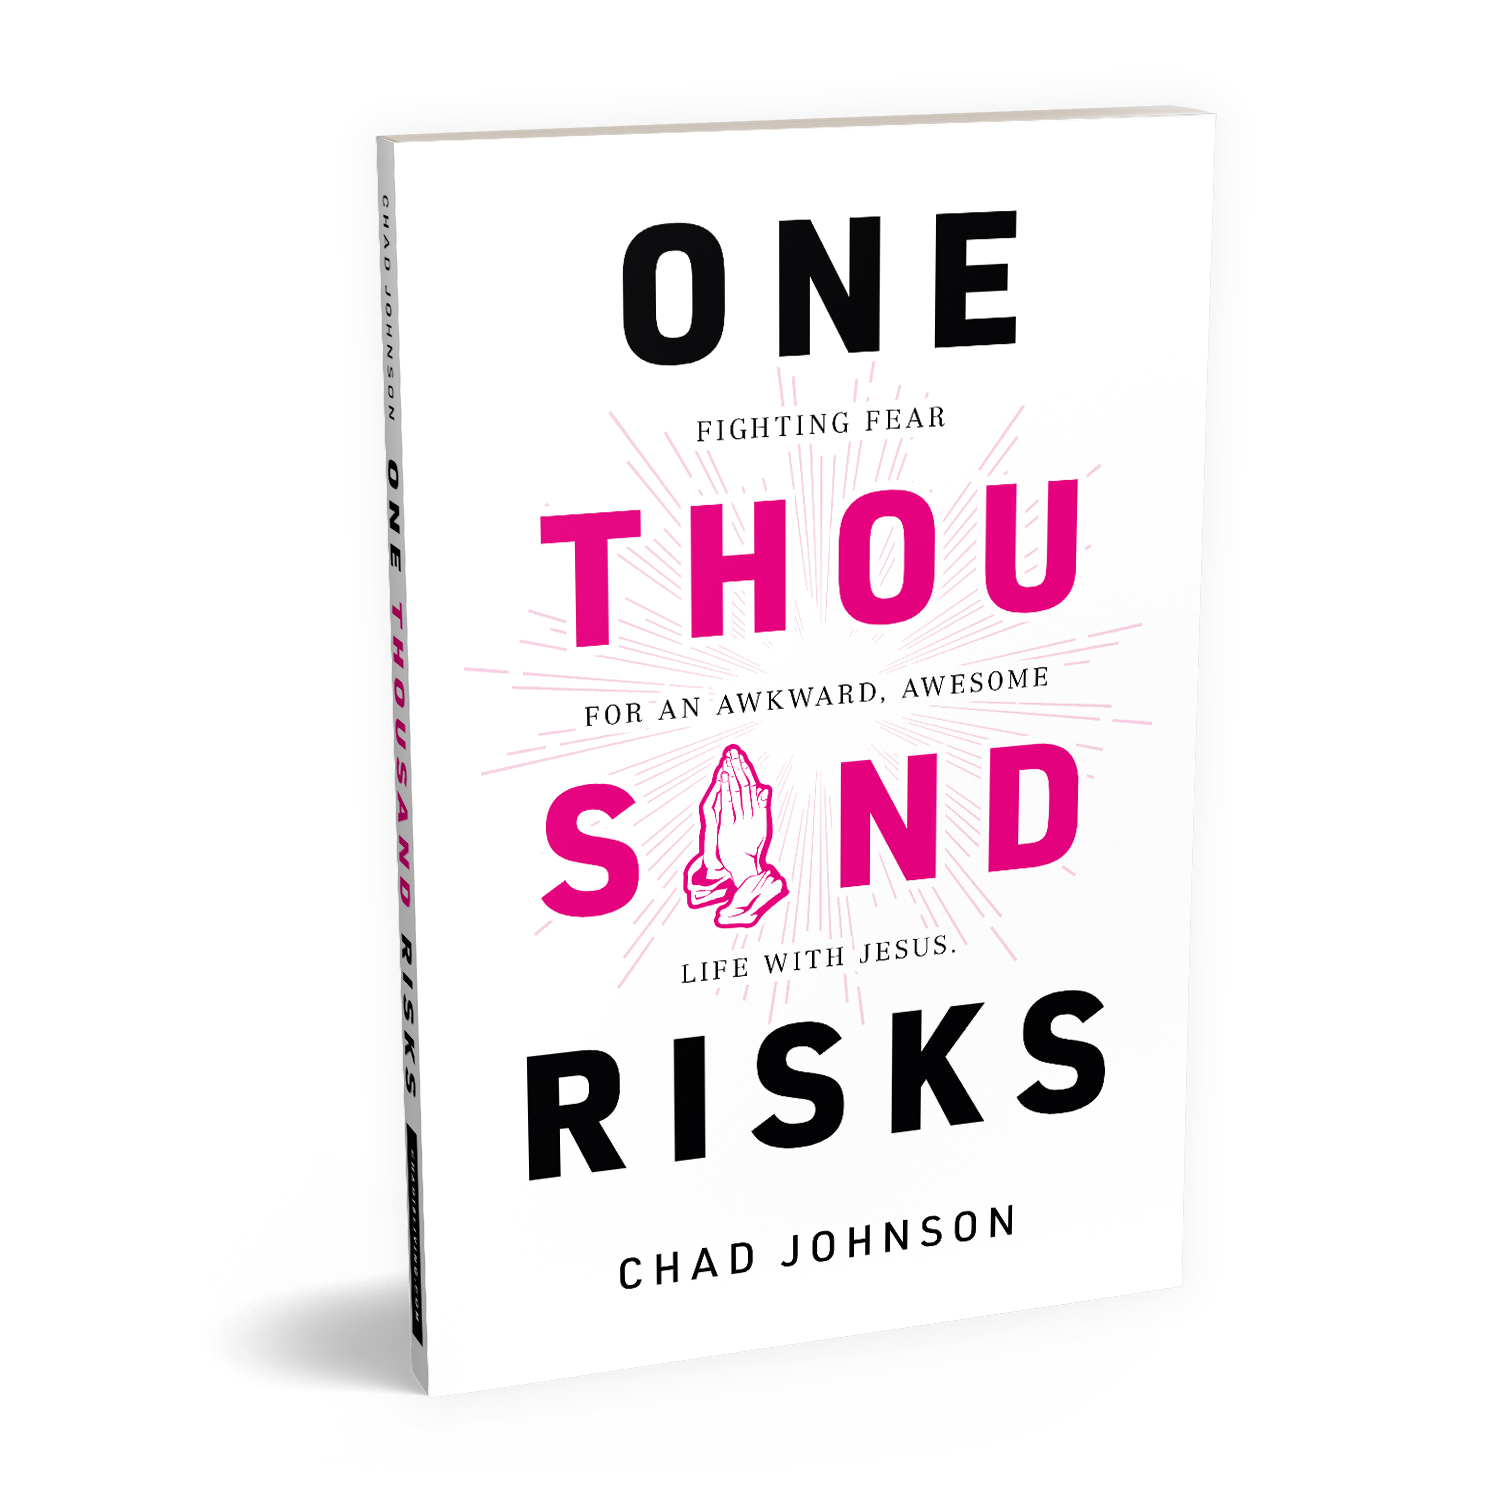 'One Thousand Risks' is an inspiring book about living a faith based life, by Chad Johnson. The book cover and interior were designed by Mark Thomas, of coverness.com. To find out more about my book design services, please visit www.coverness.com.